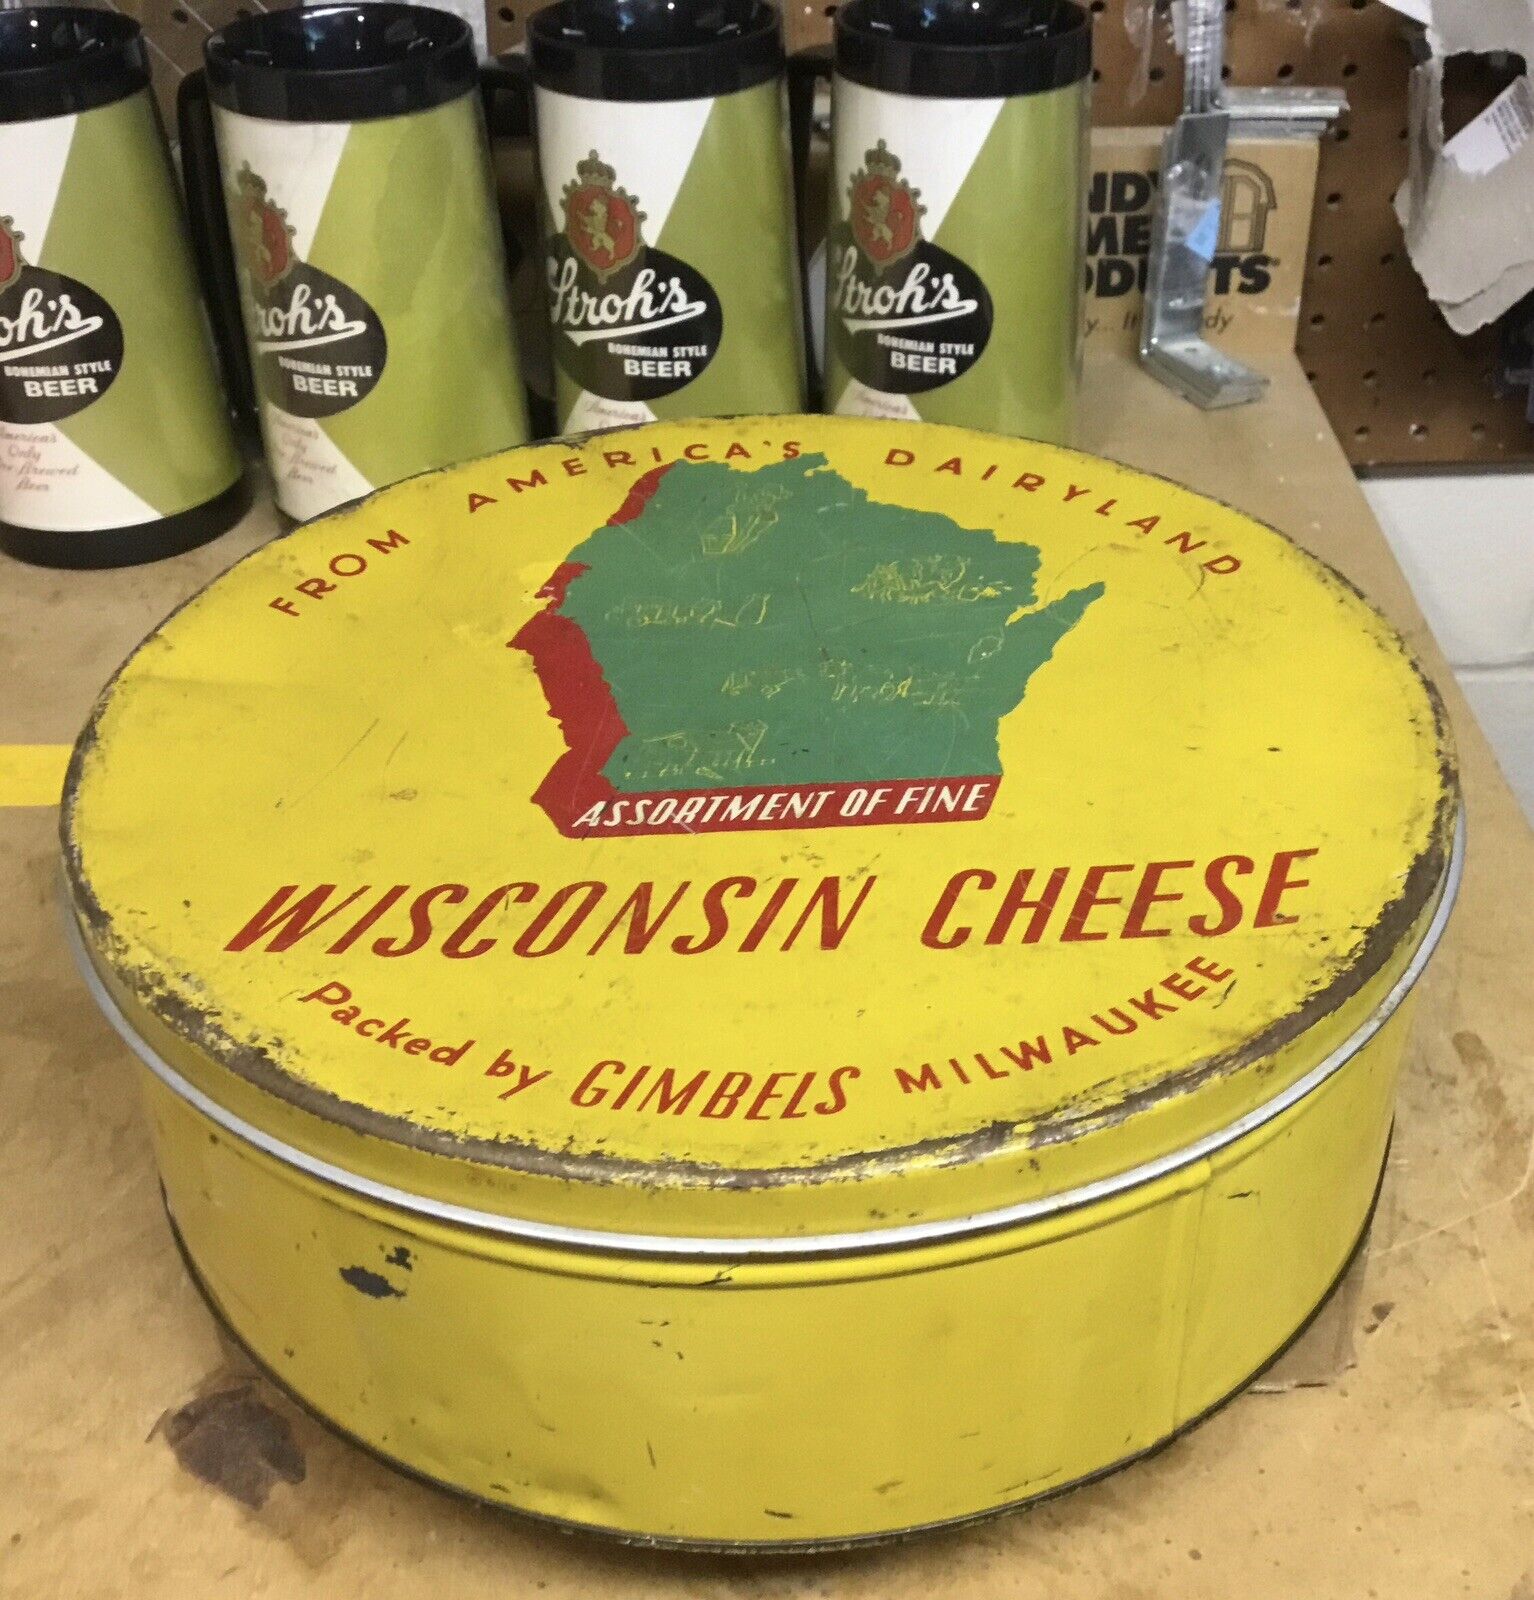 Vintage Wisconsin Cheese Tin ~ “From America’s Dairy land” ~Gimbels ~Milwaukee